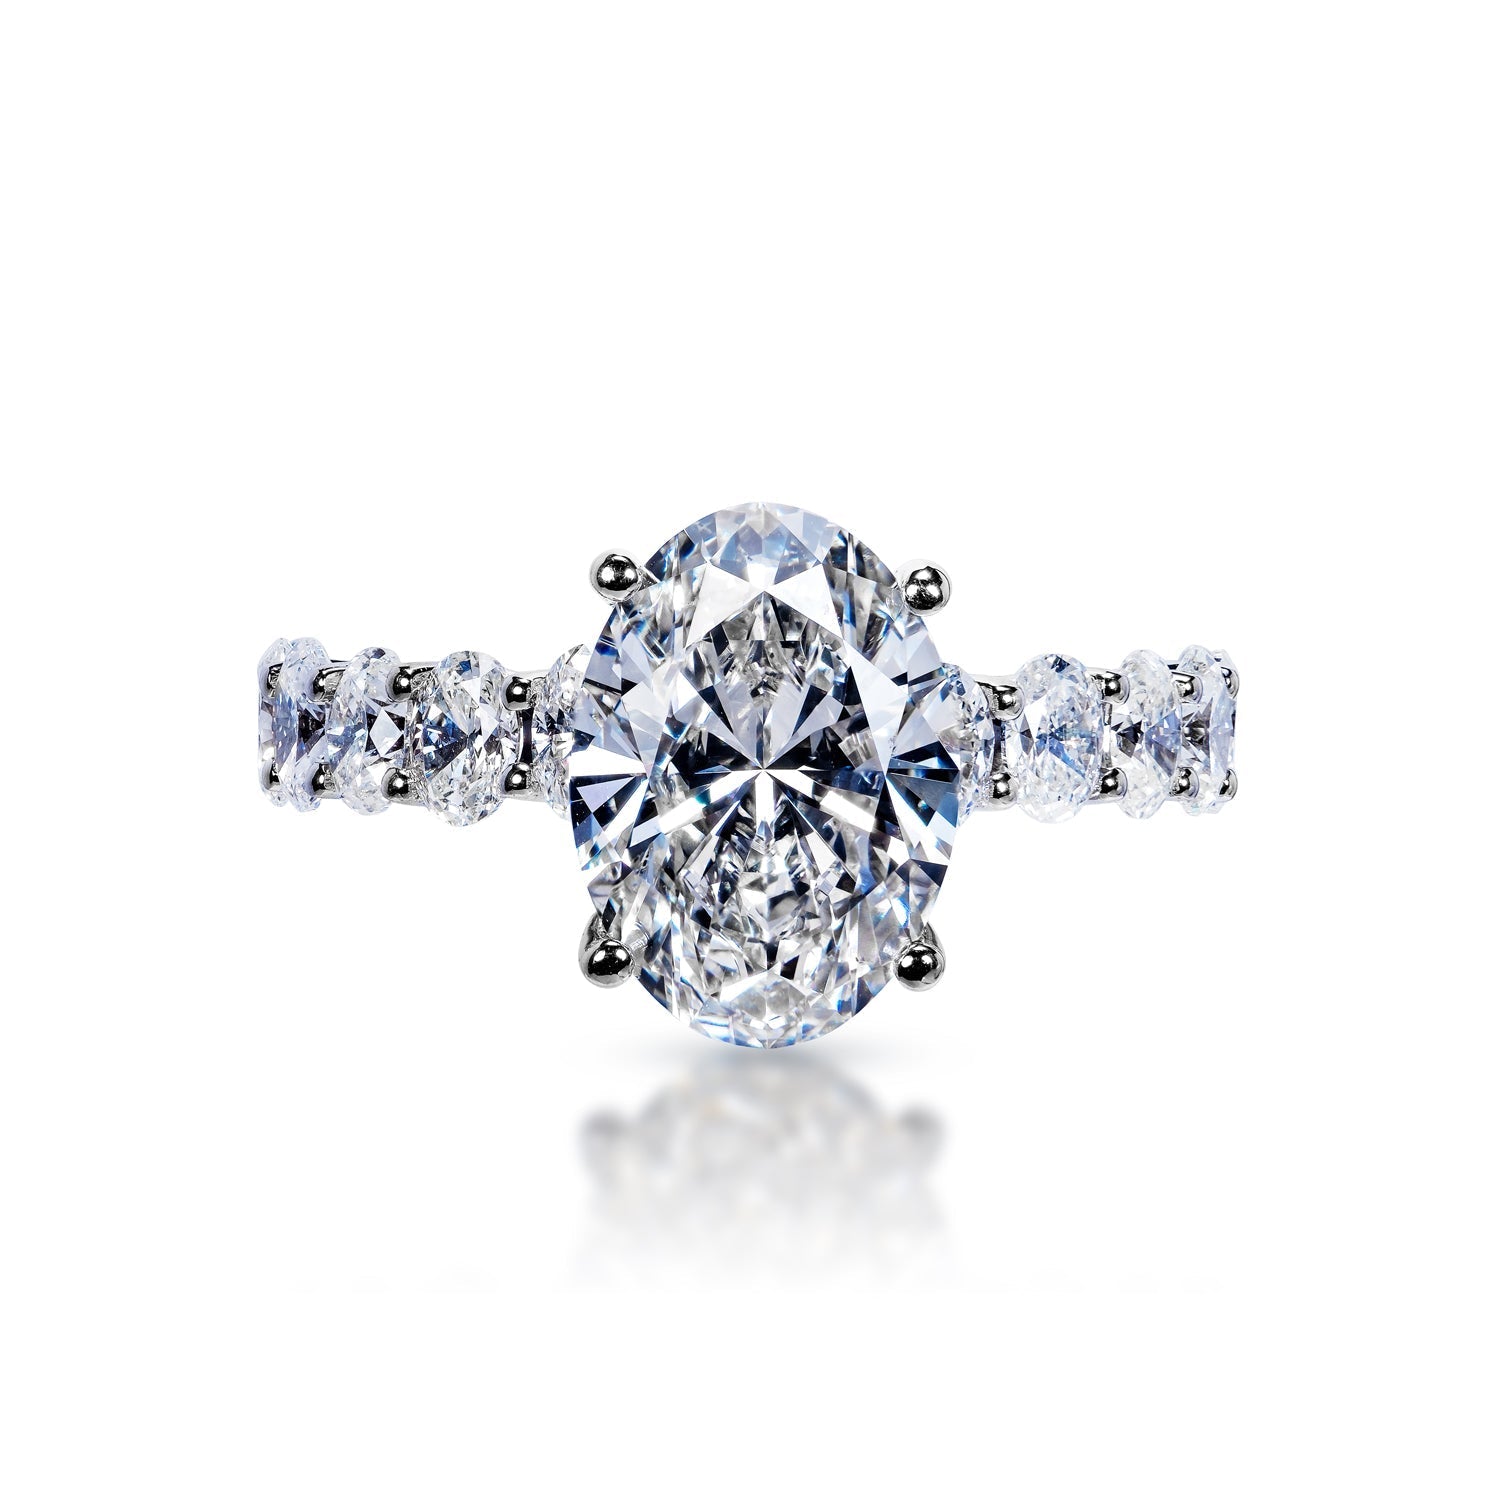 Maisie 5 Carats E VS1 Oval Cut Diamond Engagement Ring in 18k White Gold Front View